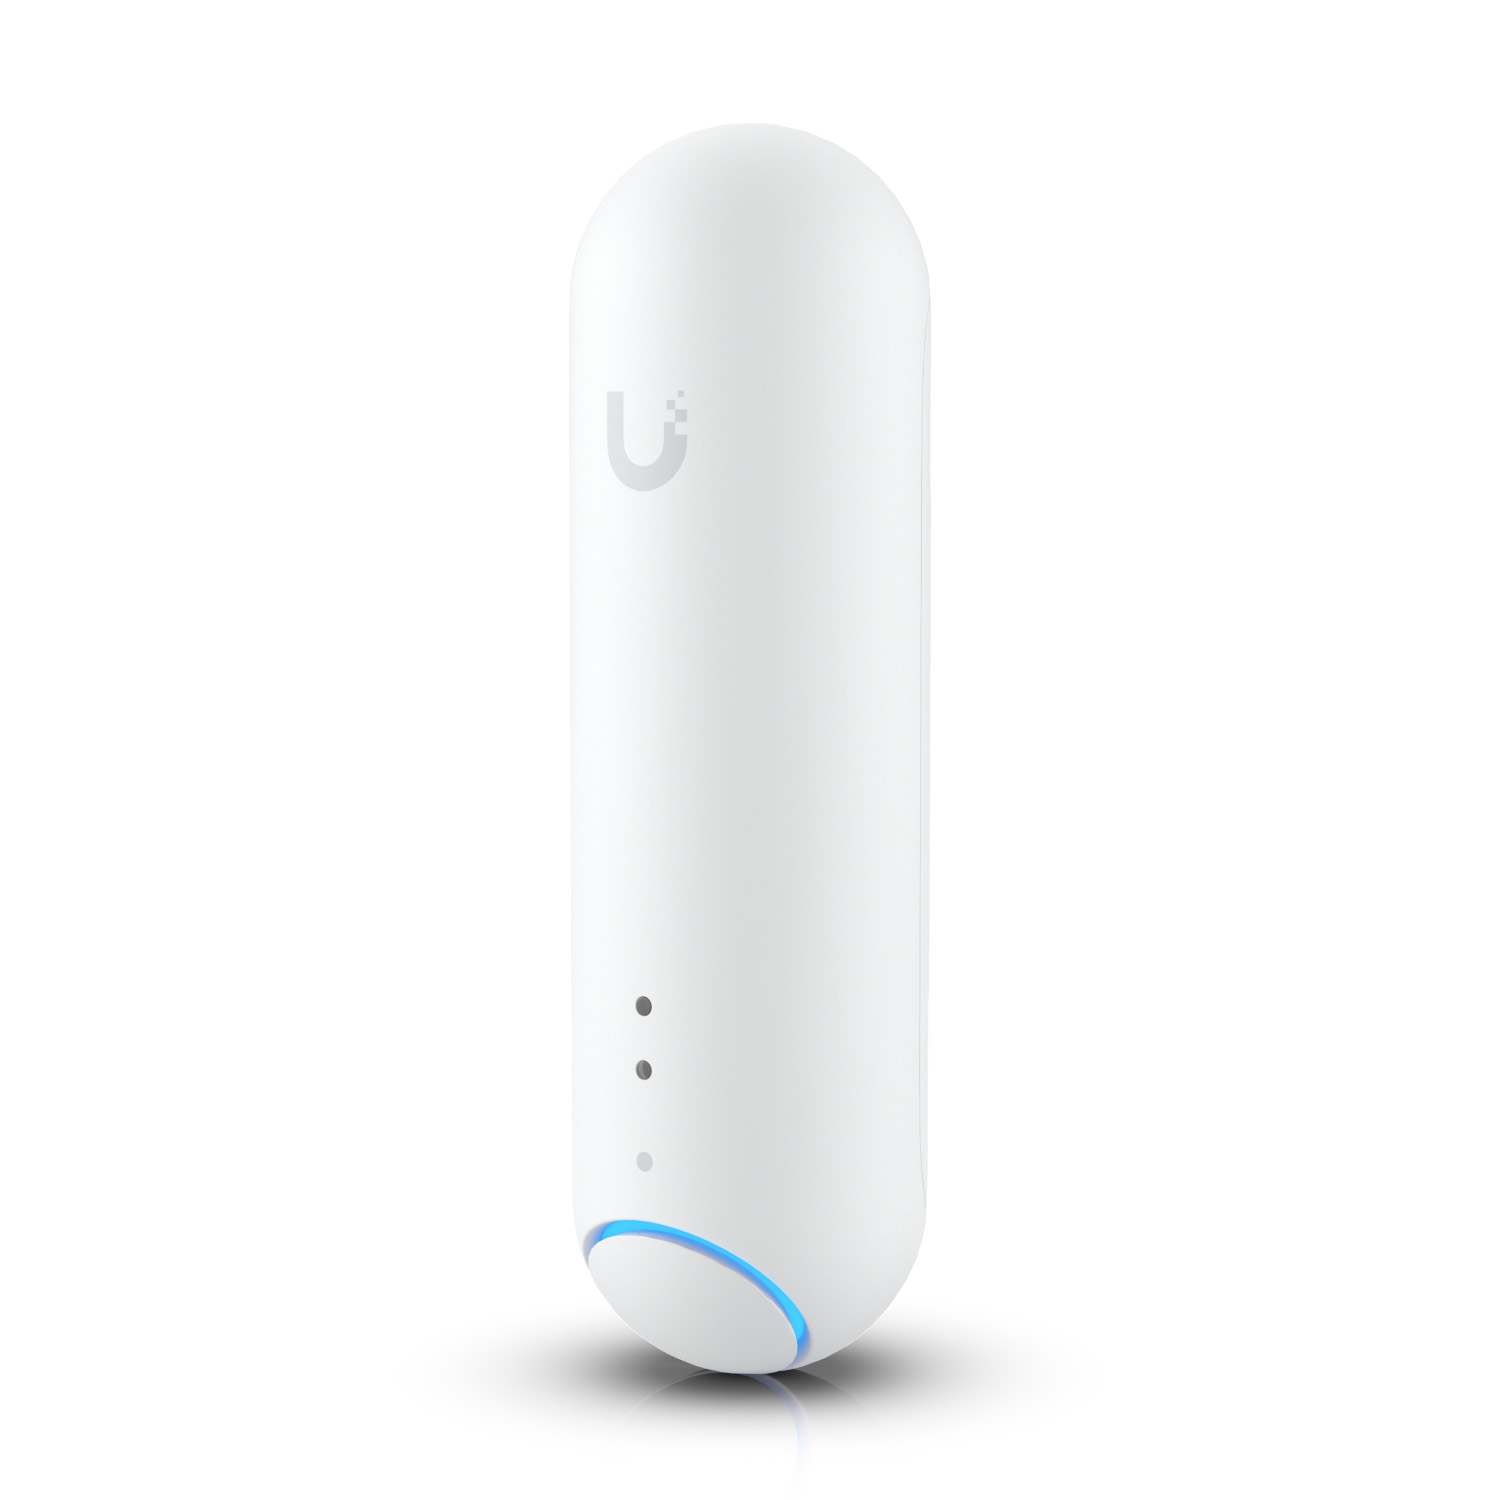 Ubiquiti UniFi Protect Special Devices